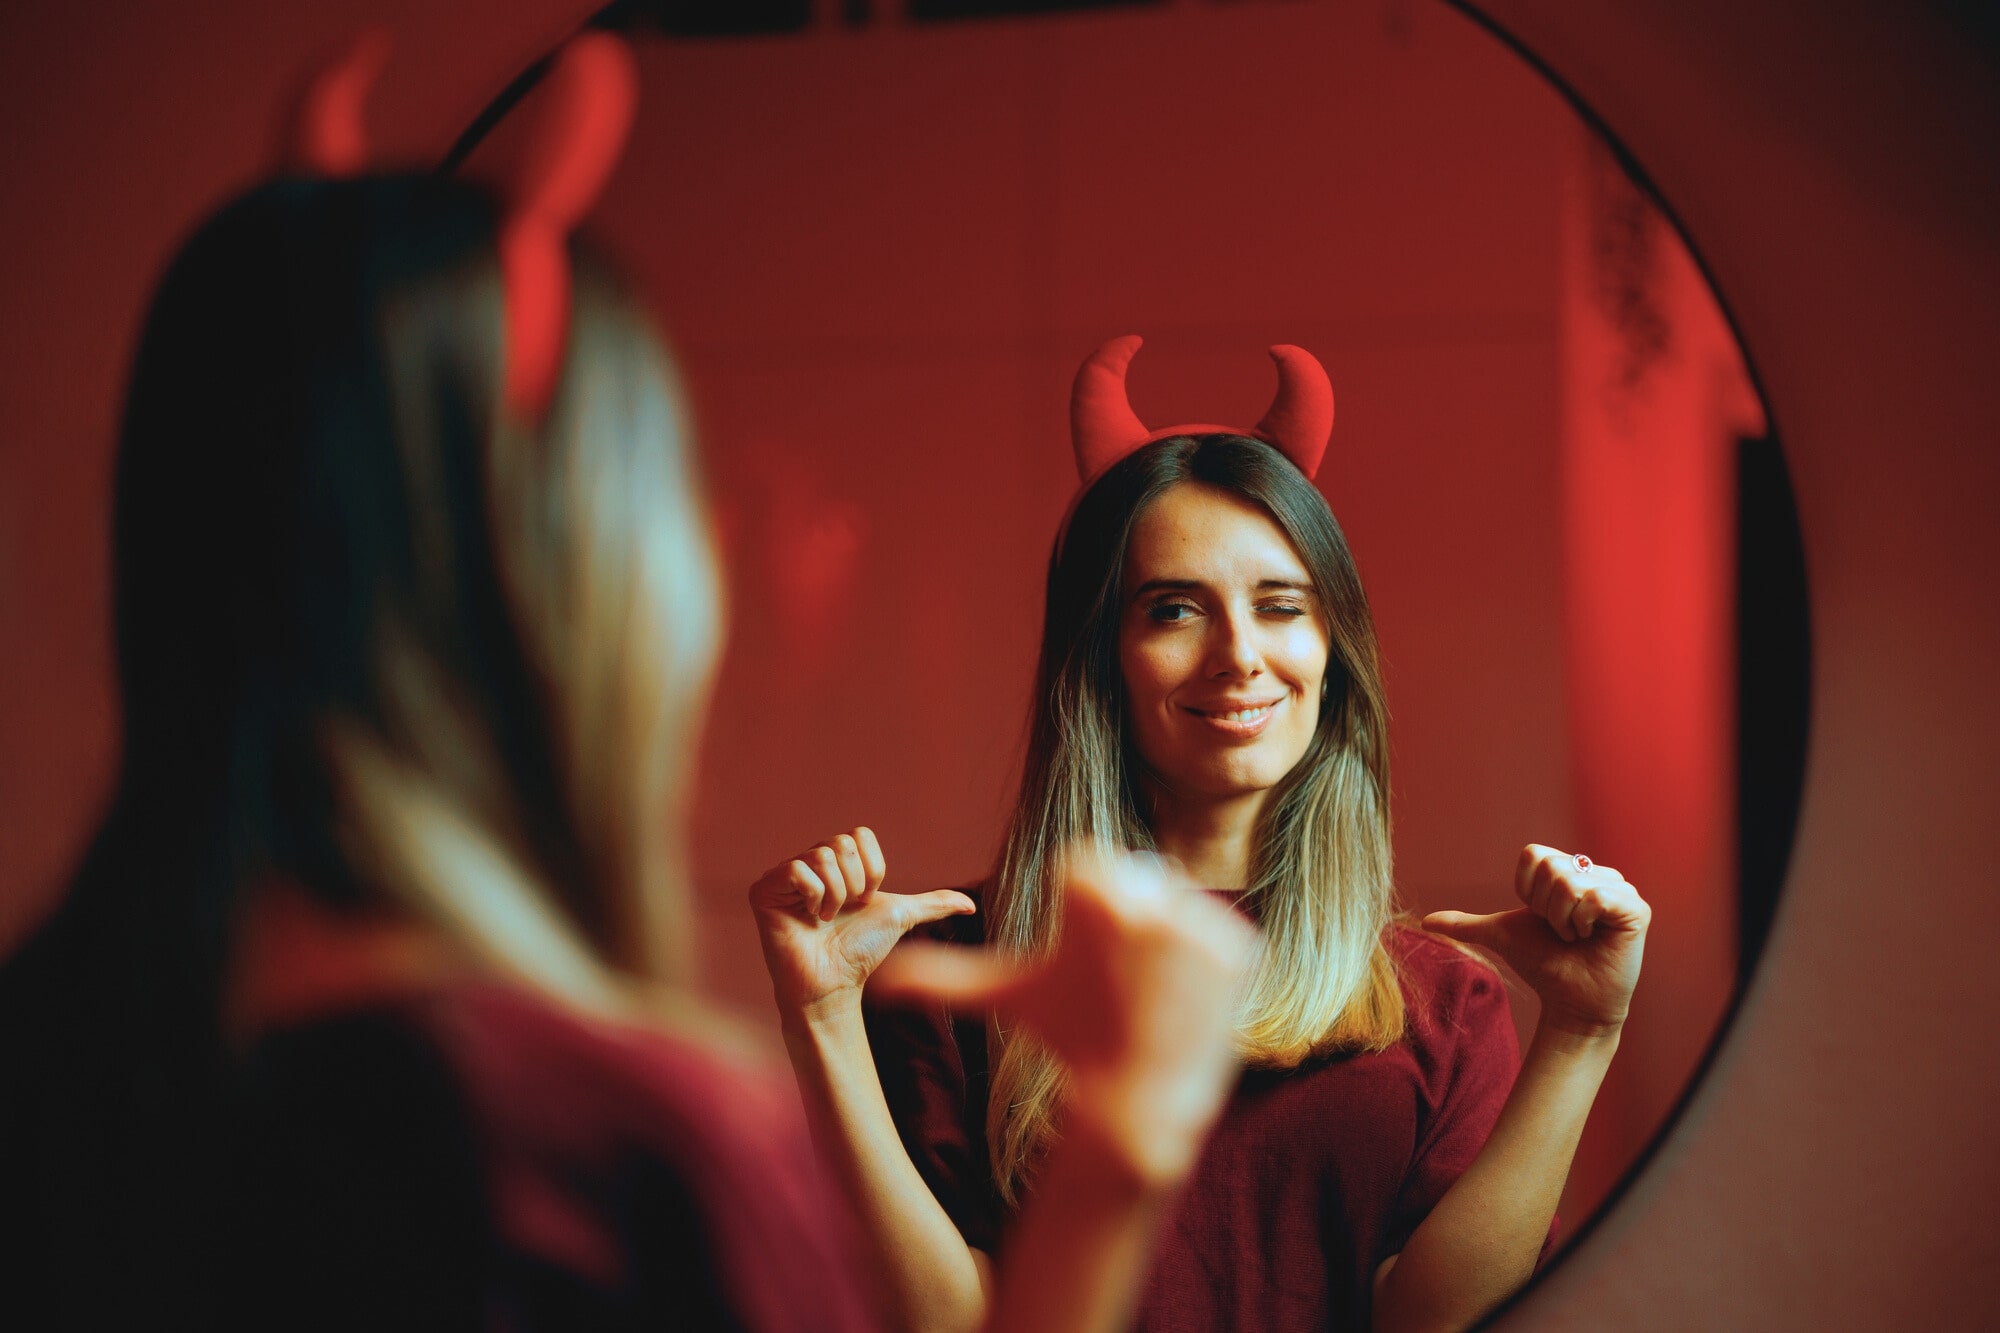 A woman with long hair, wearing red devil horns, stands in front of a round mirror. She is making a playful winking gesture and pointing at herself with both thumbs. The lighting in the room casts a red glow, adding to the playful atmosphere.